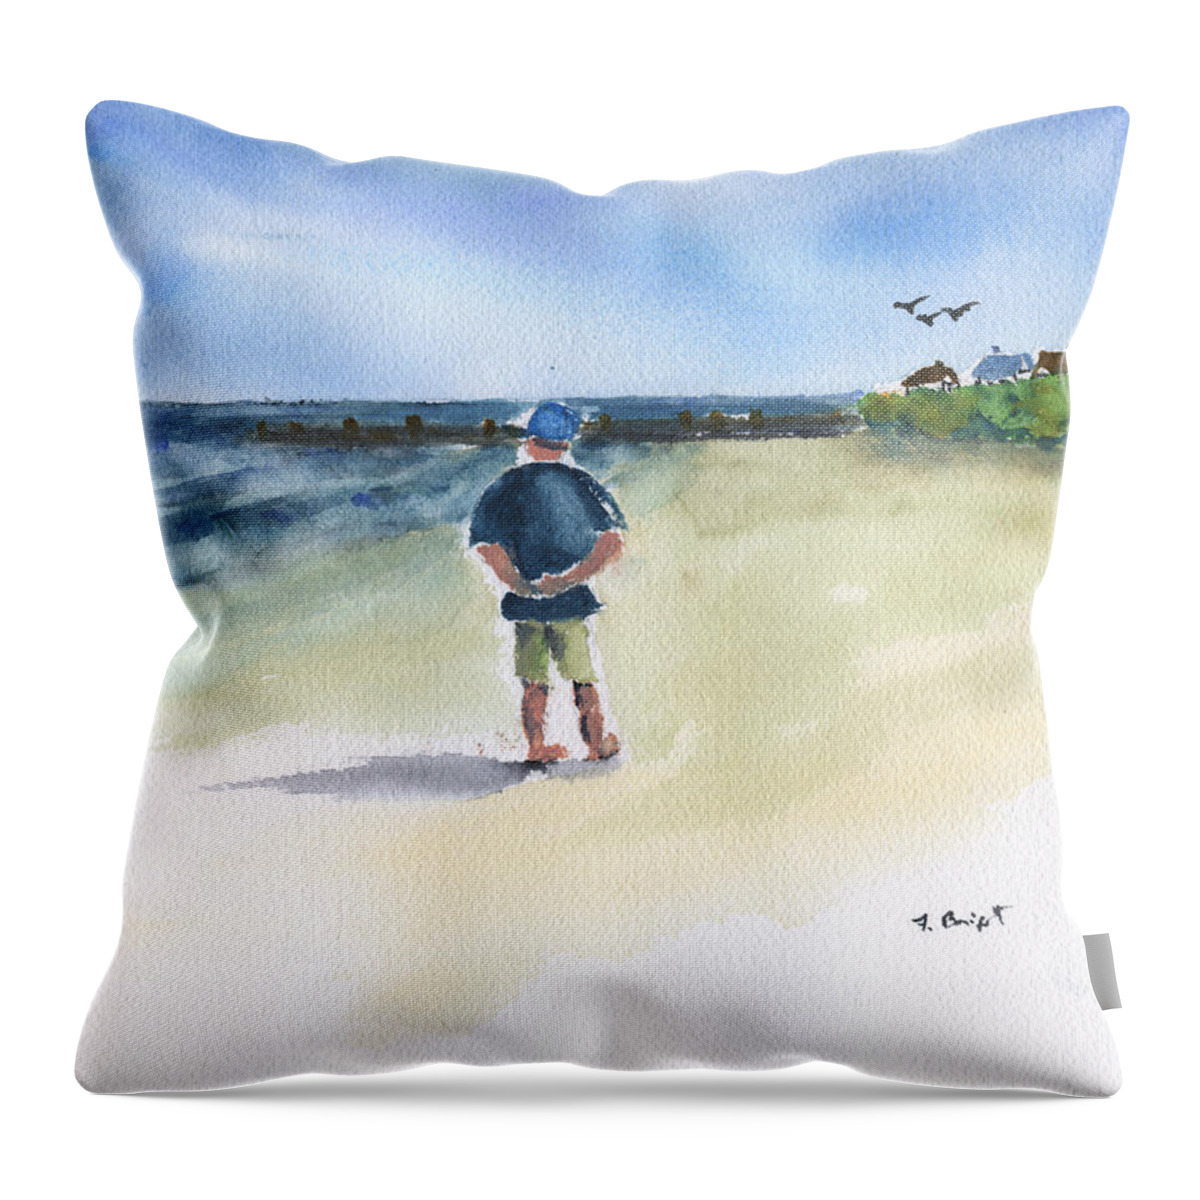 Reflection On A Sunny Day Throw Pillow featuring the painting Reflection On A Sunny Day by Frank Bright